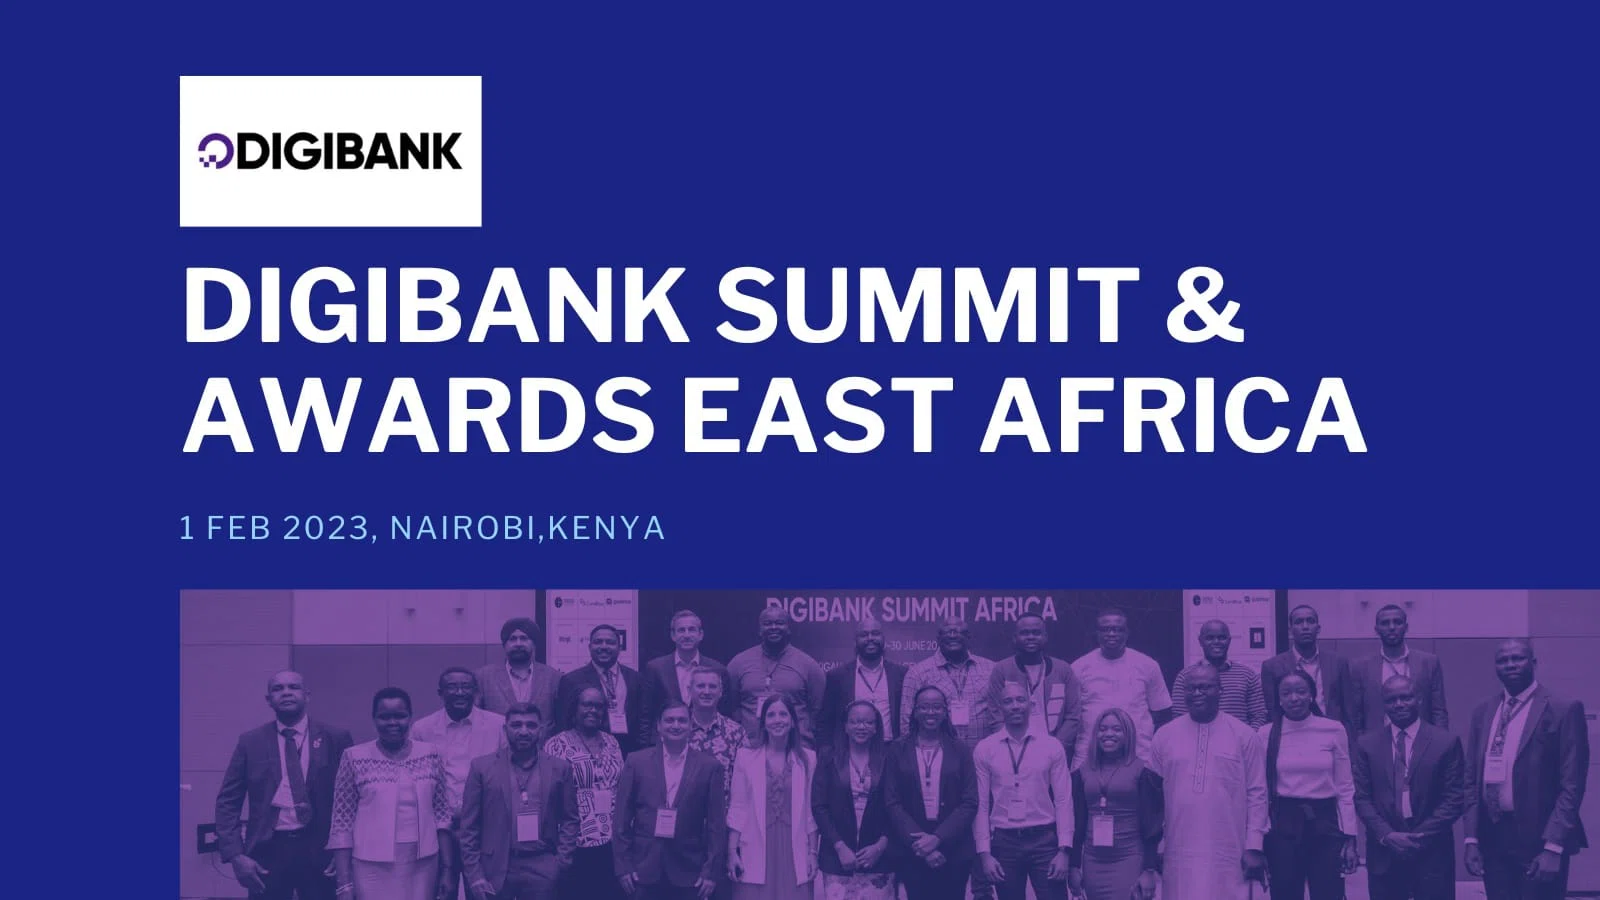 Digibank Summit & Awards East Africa